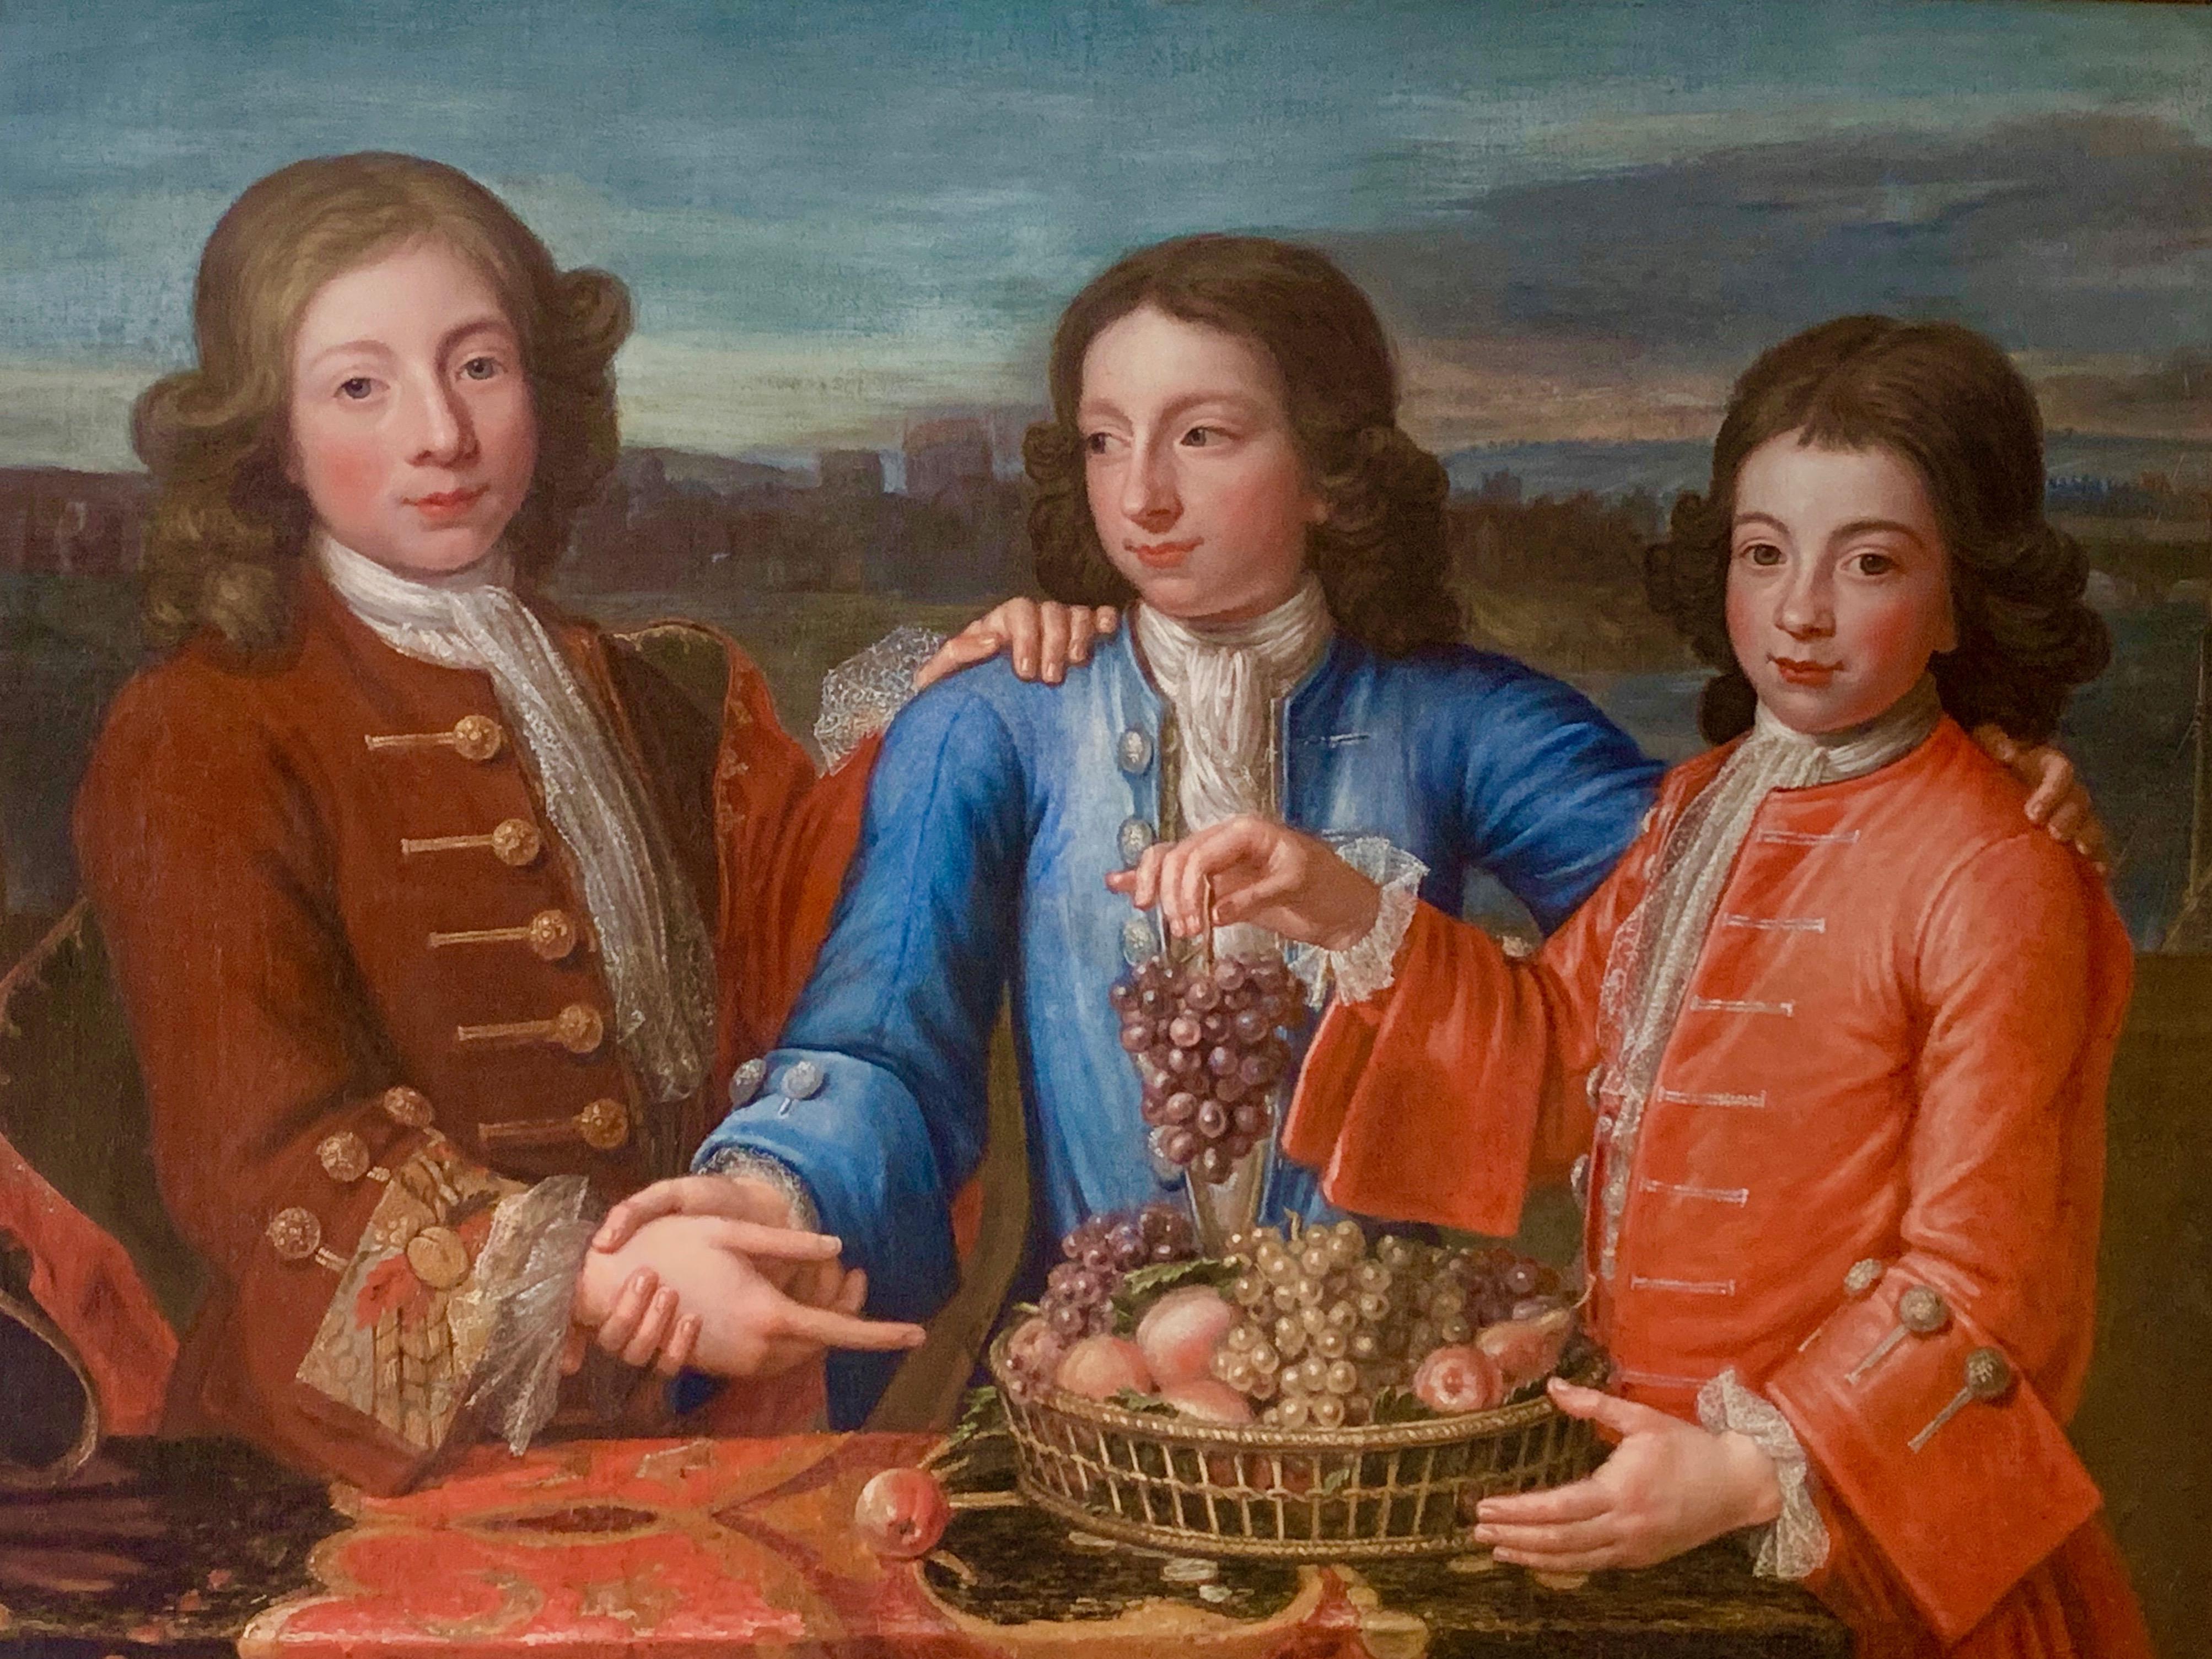 Stephen Slaughter Interior Painting - 18th Century British Portrait of Three Boys in Red and Blue Silk Jackets.